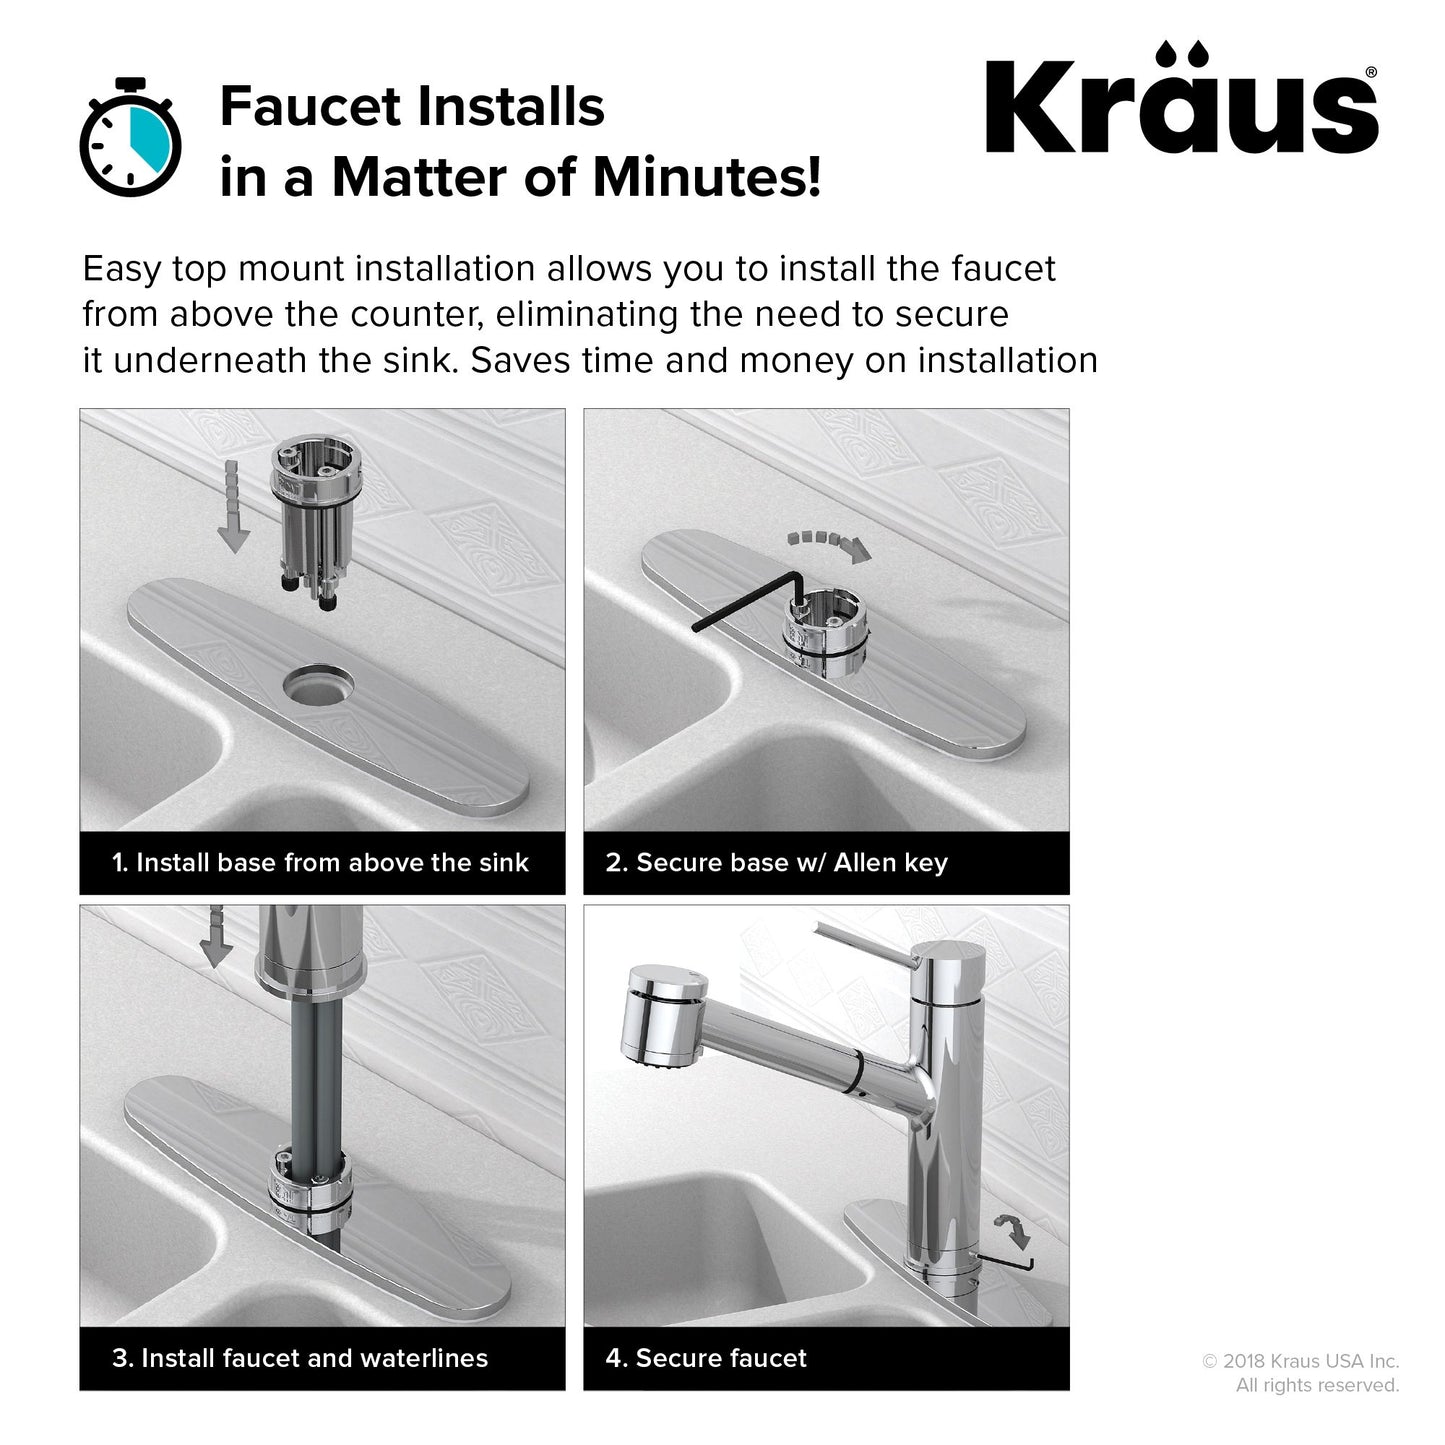 Kraus Oletto 15.75" Single Handle Pull-Down Kitchen Faucet in Spot Free Stainless Steel